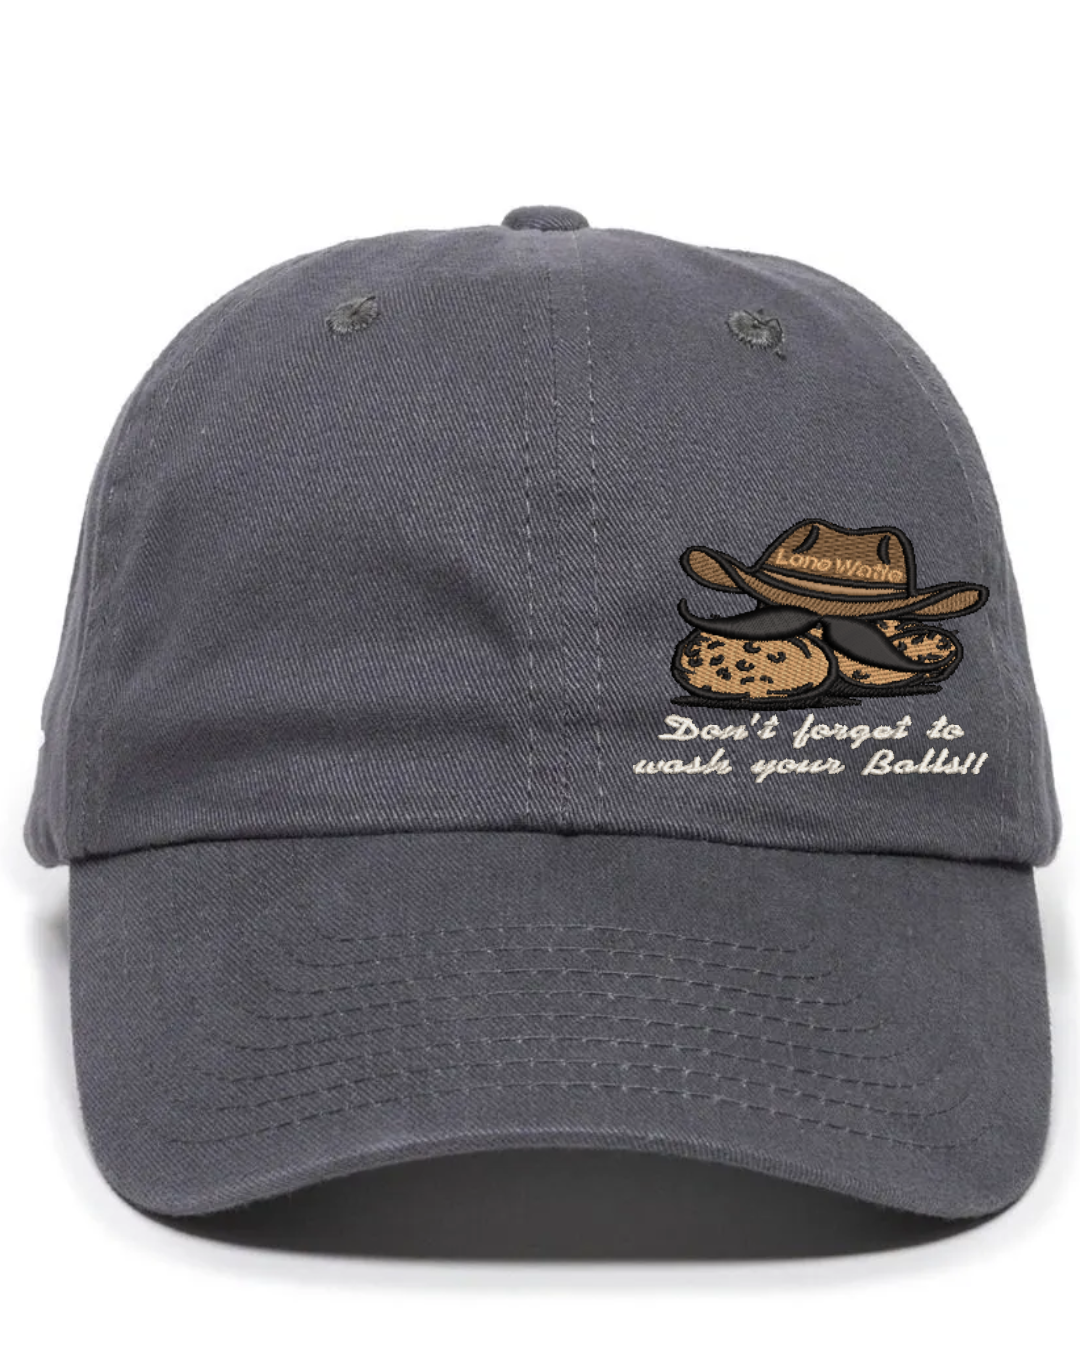 Lone Watie Embroidered Ball Cap with Slogan